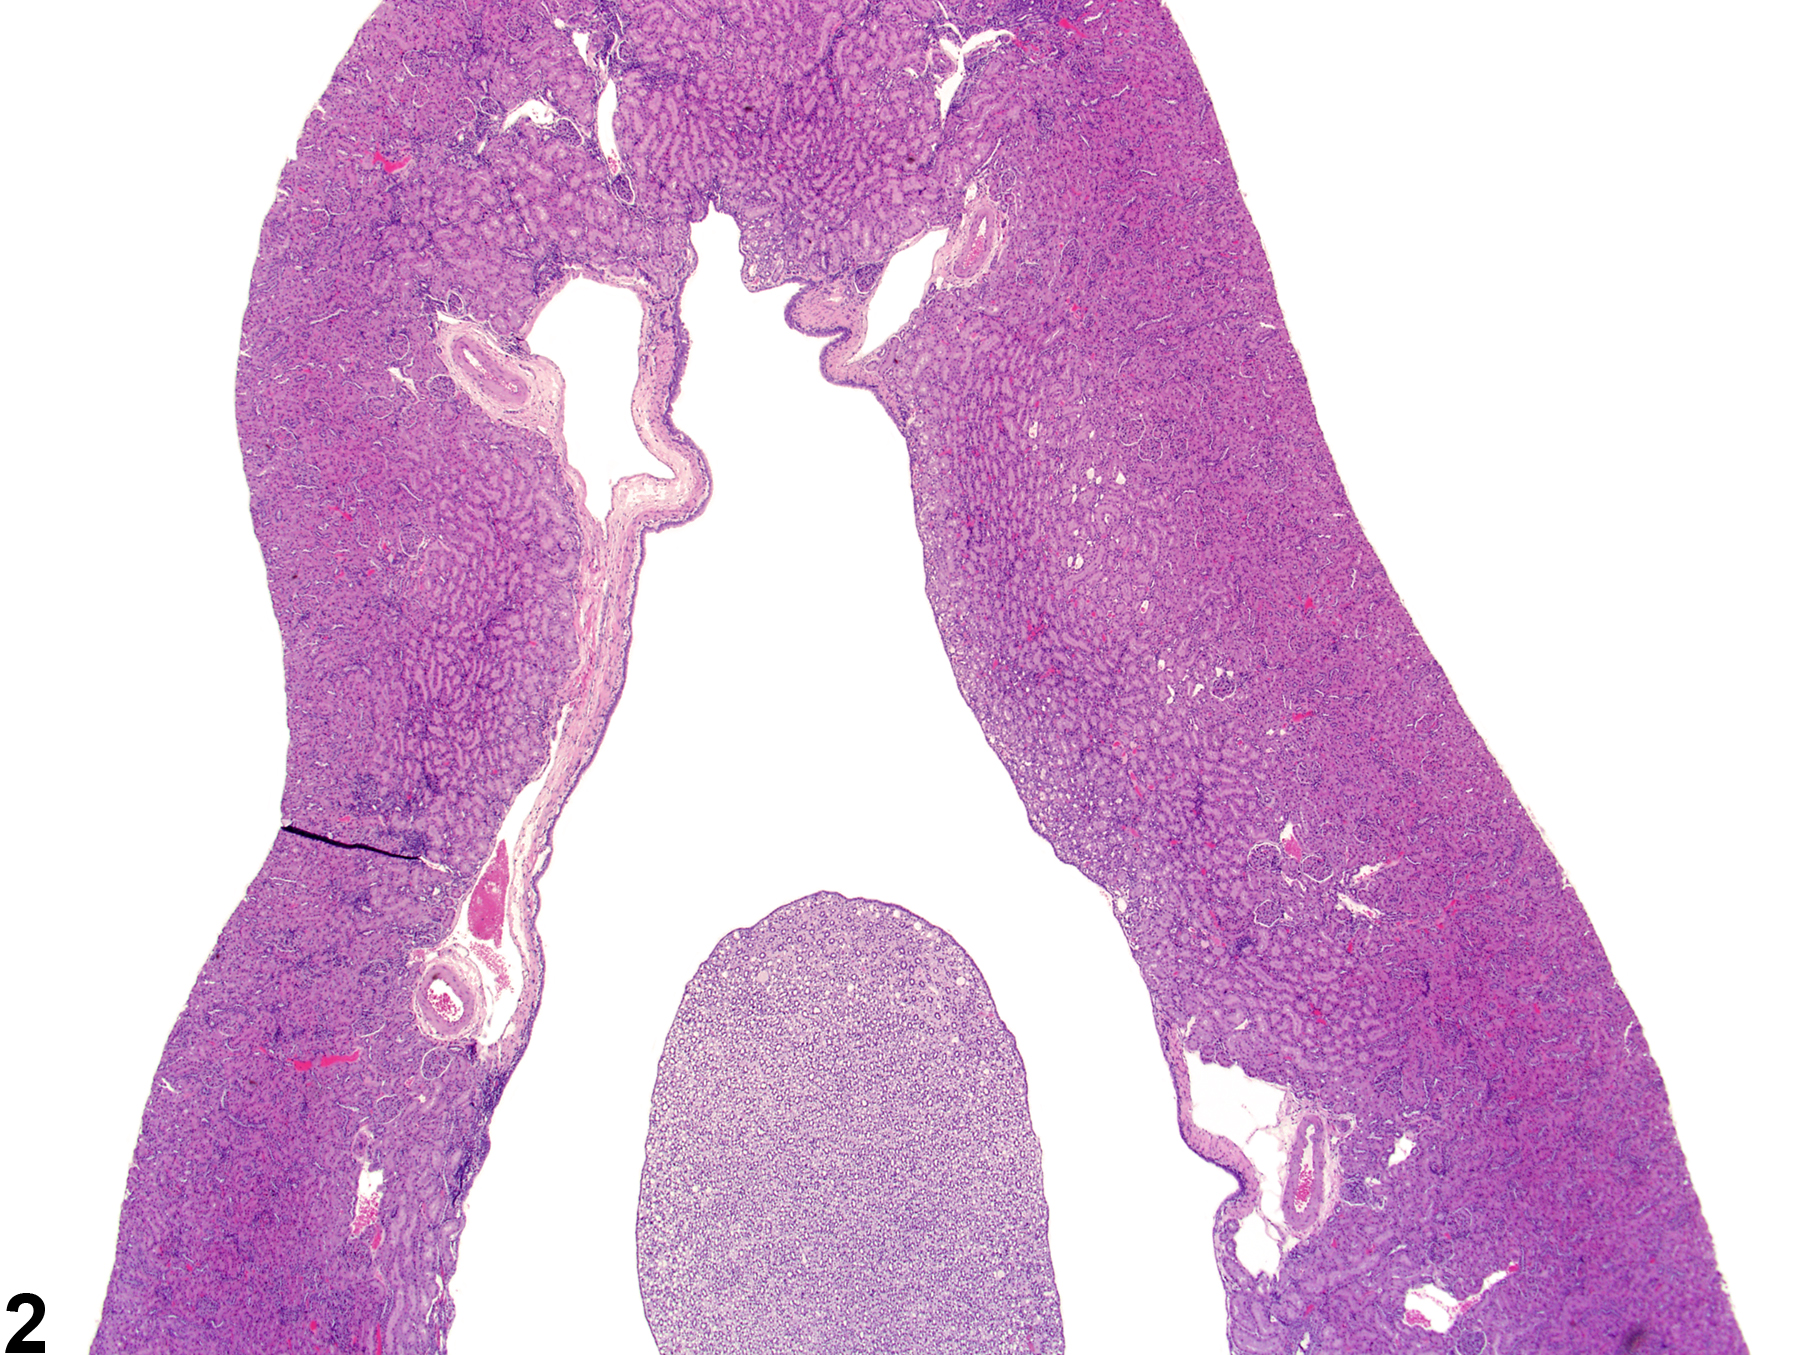 Image of renal pelvis dilation in the kidney from a male  rat in a subchronic study